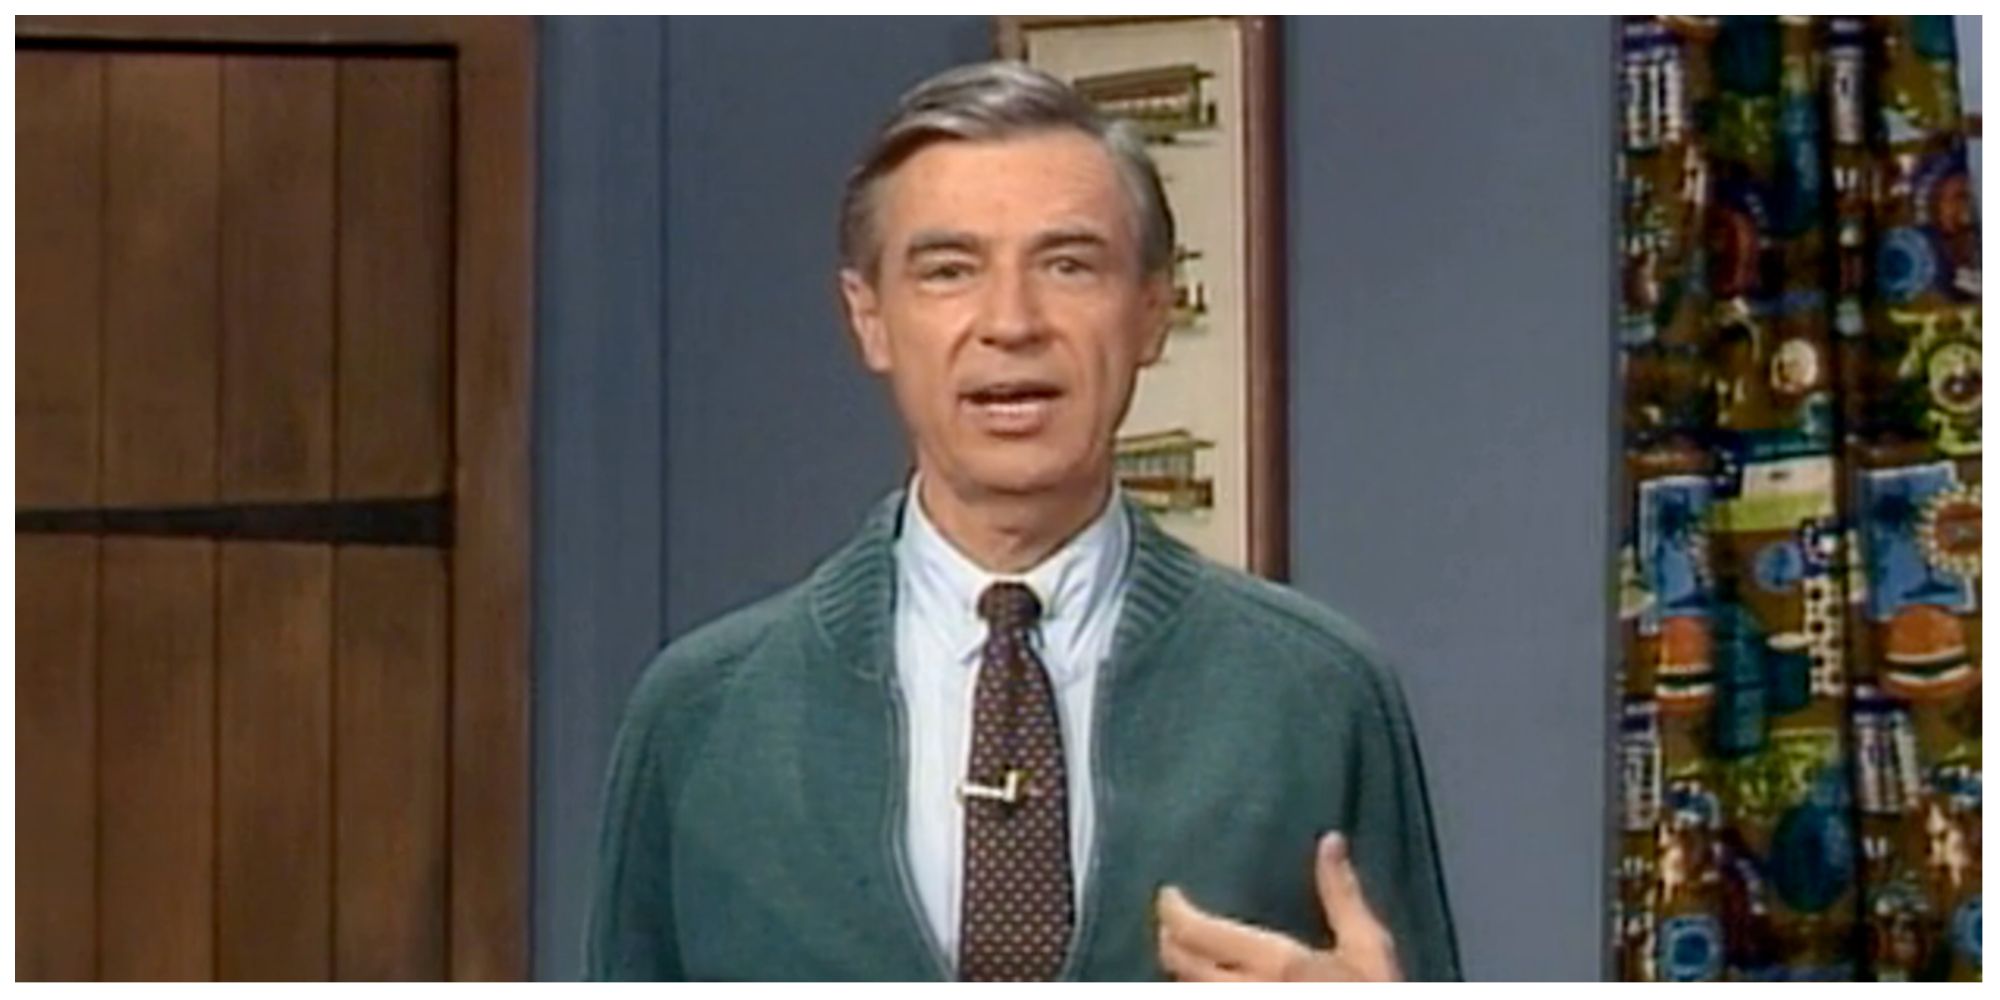 Fred Rogers from Mr. Rogers' Neighborhood